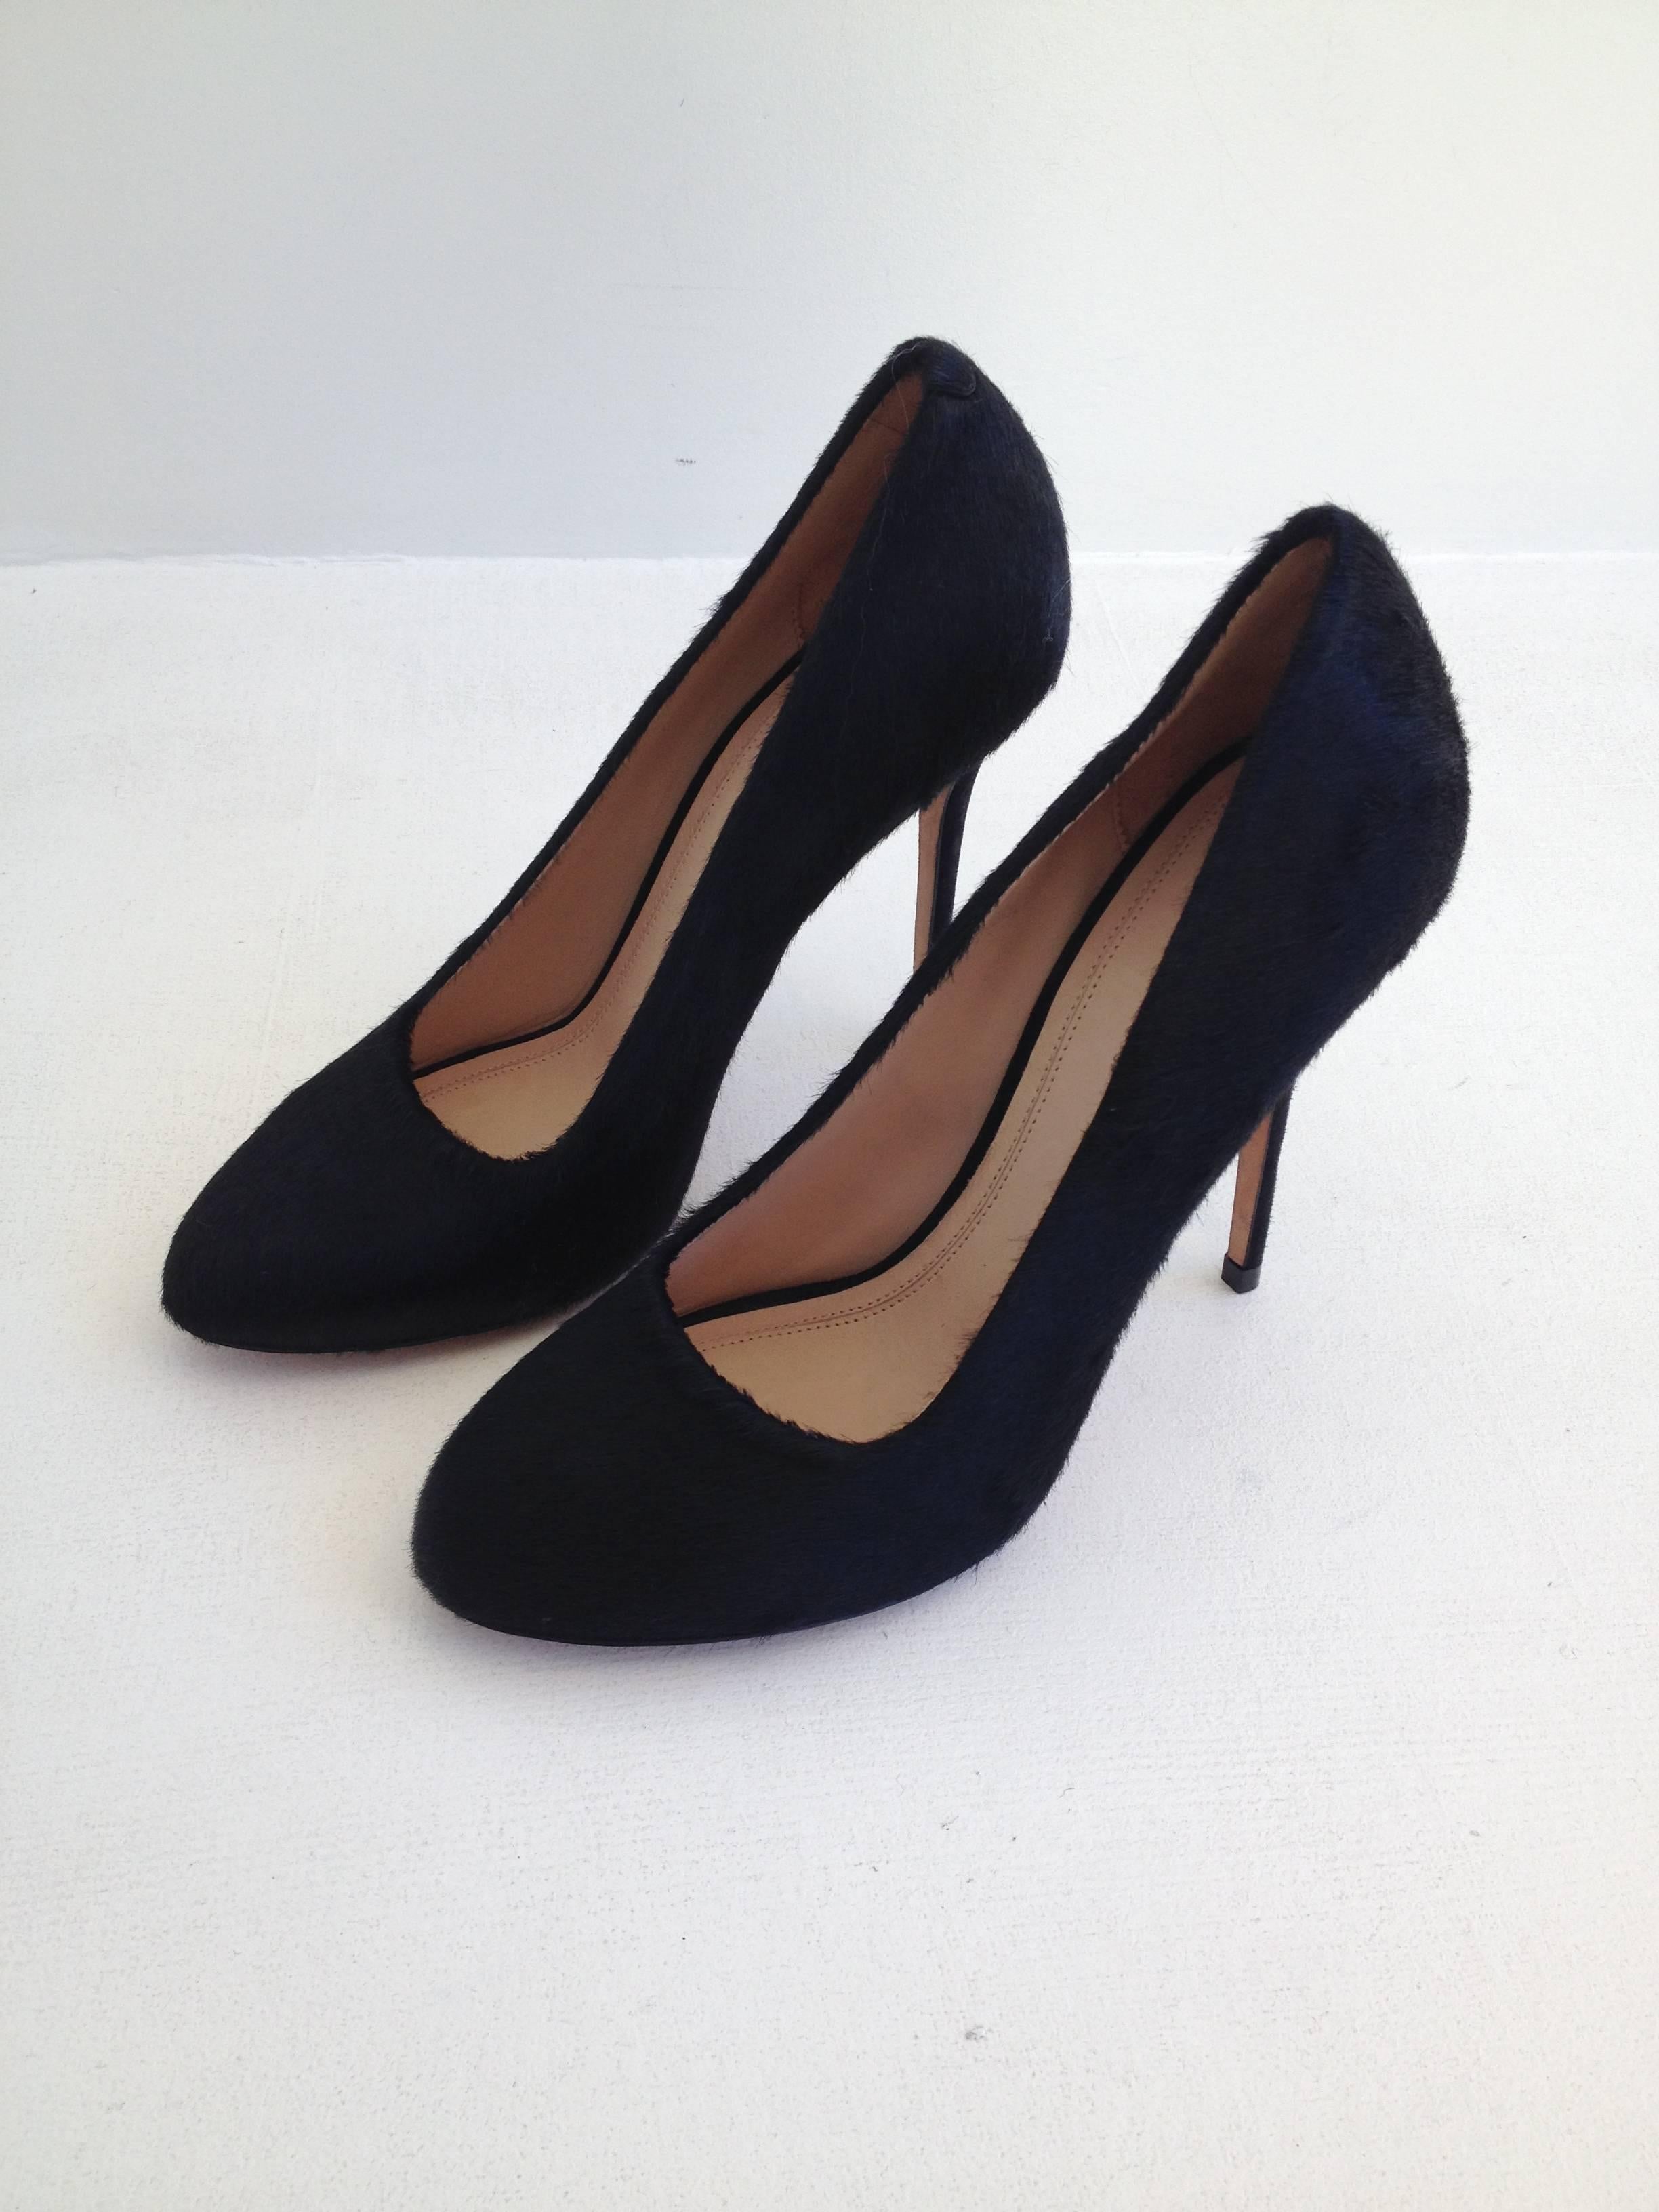 Celine Black Ponyhair Heels Size 37 (6.5) In New Condition For Sale In San Francisco, CA